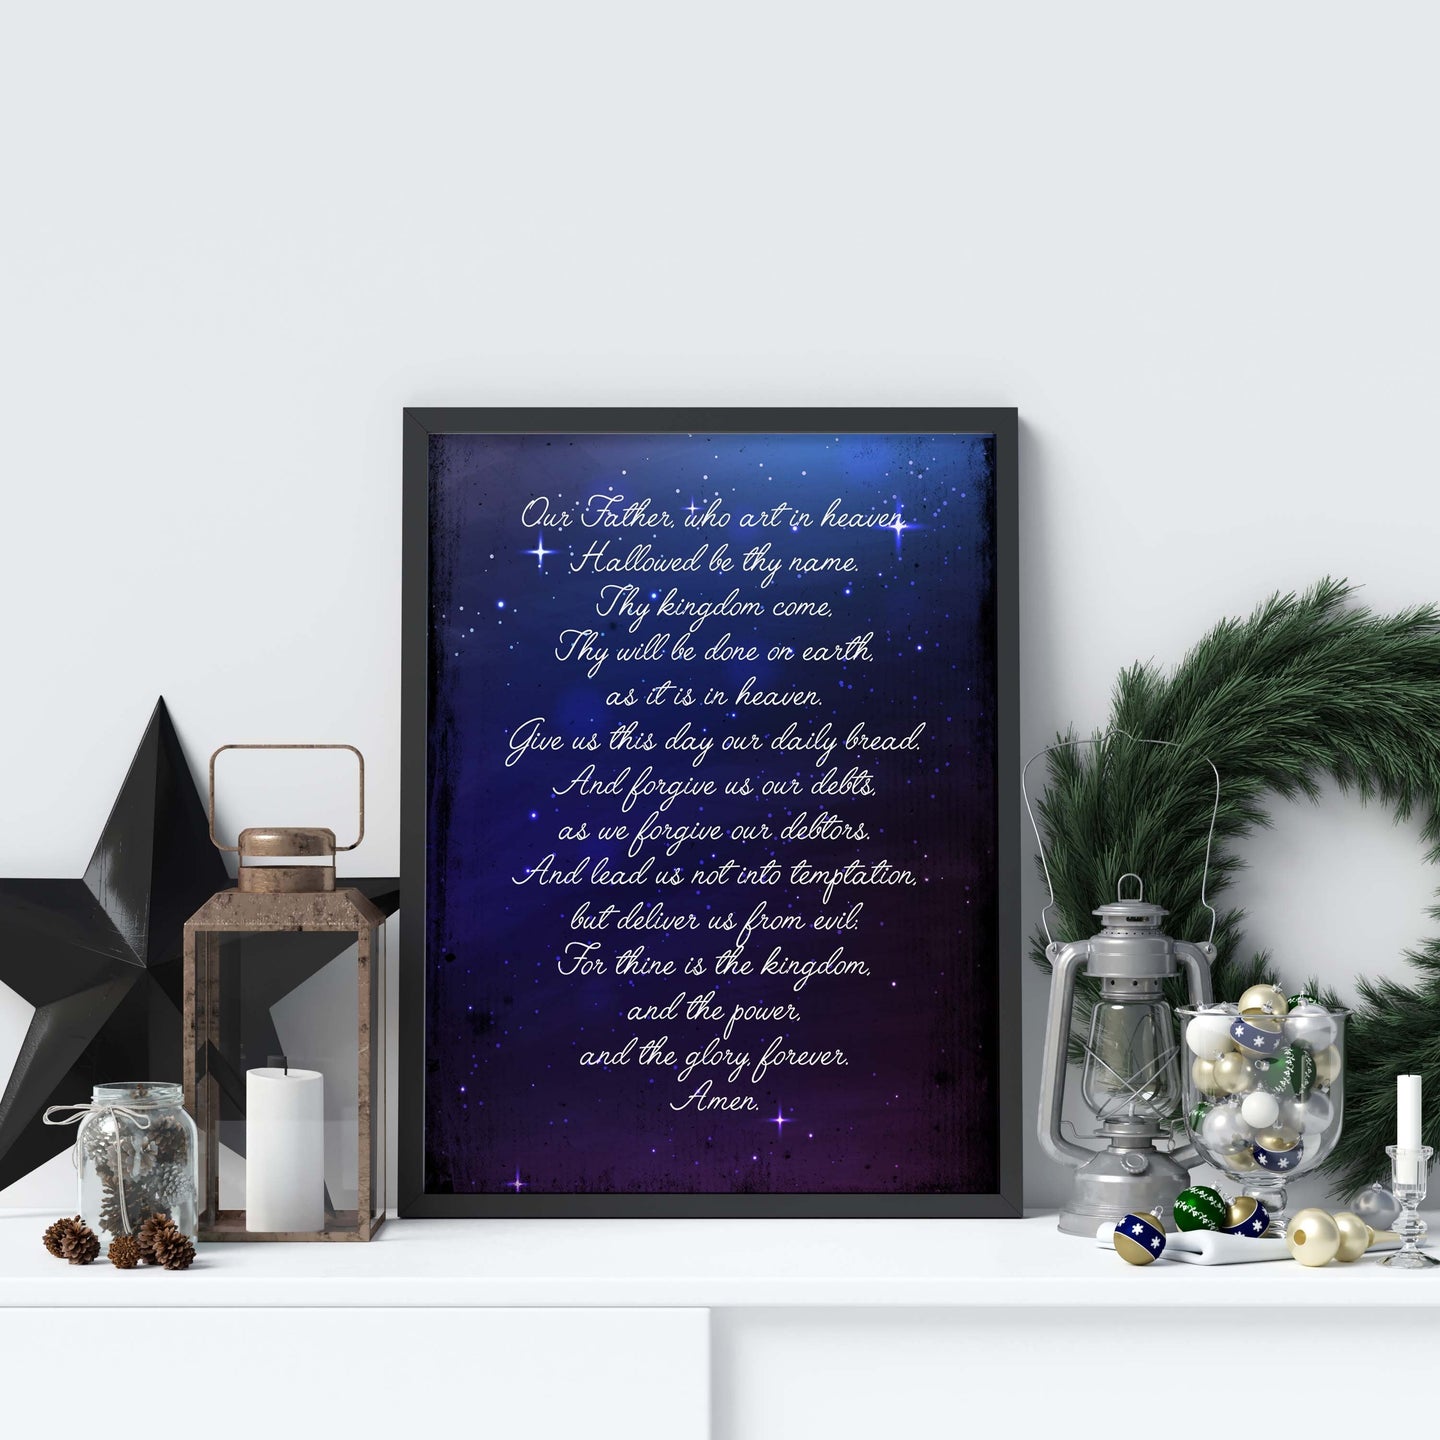 Lord's Prayer Print - Our Father Prayer - UNFRAMED